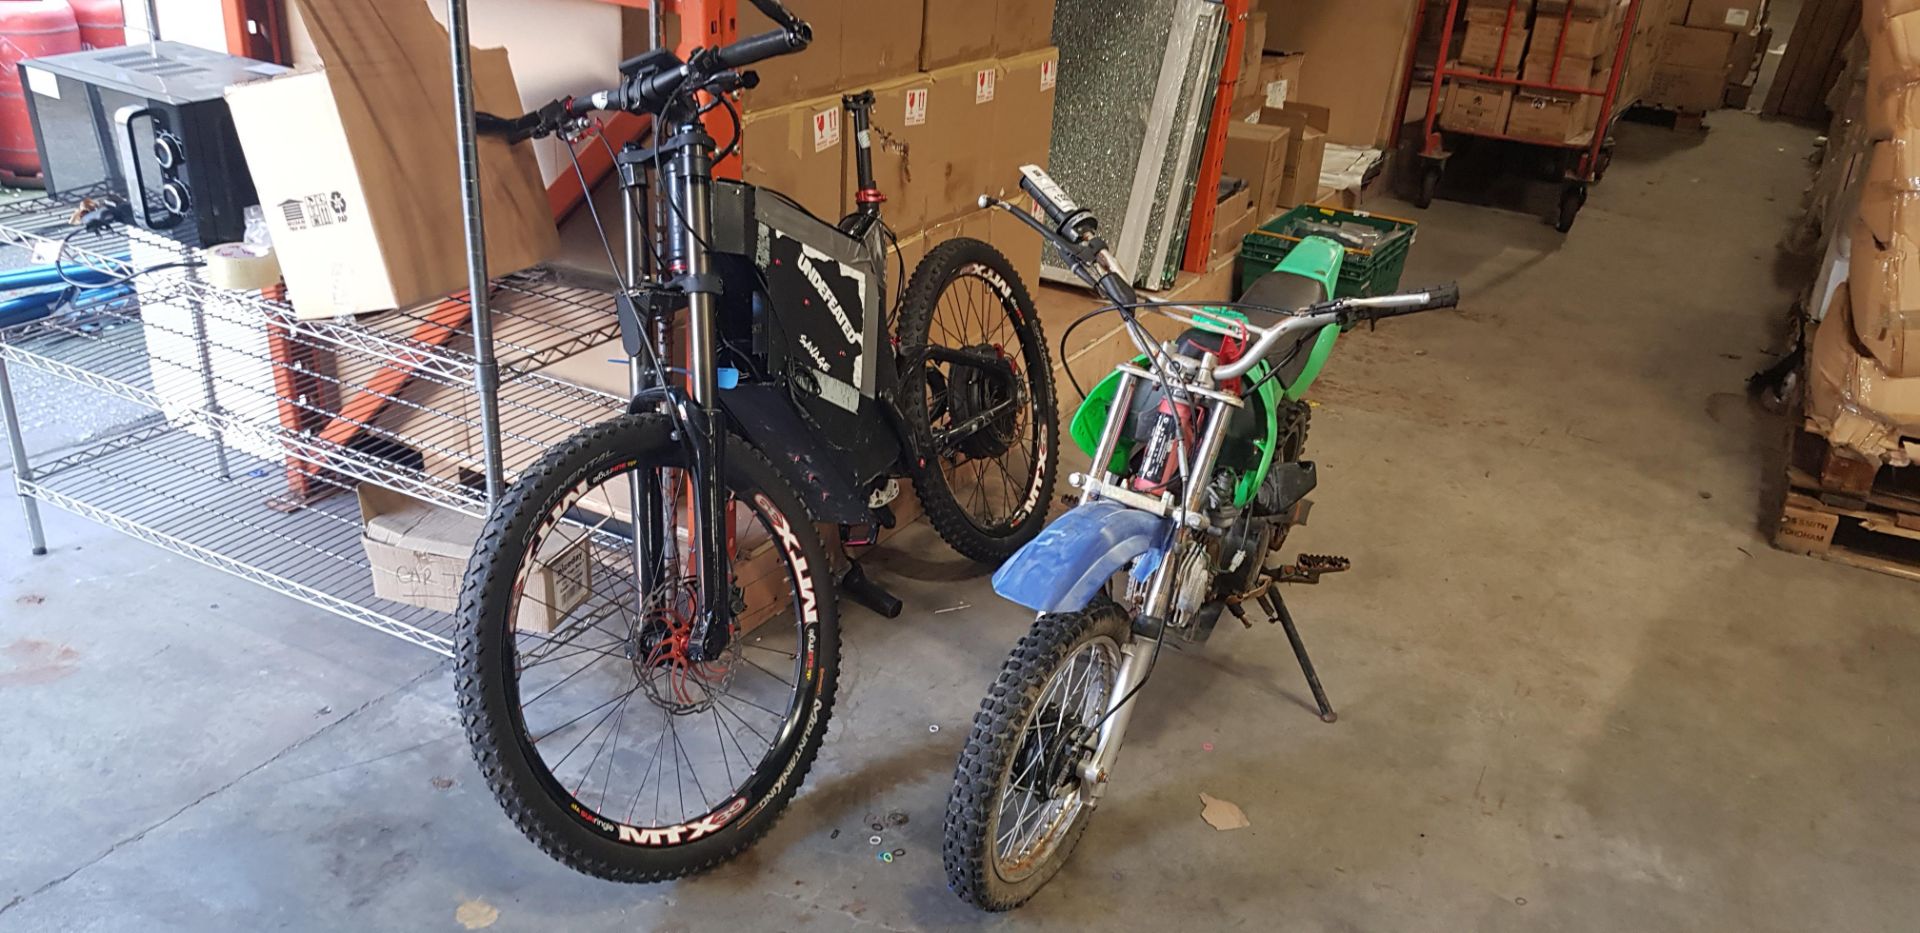 2 PIECE MIXED BIKE LOT CONTAINING 1 X MOTO MADDNESS 125 CC PIT BIKE ( NOT IN WORKING CONDITION ) (